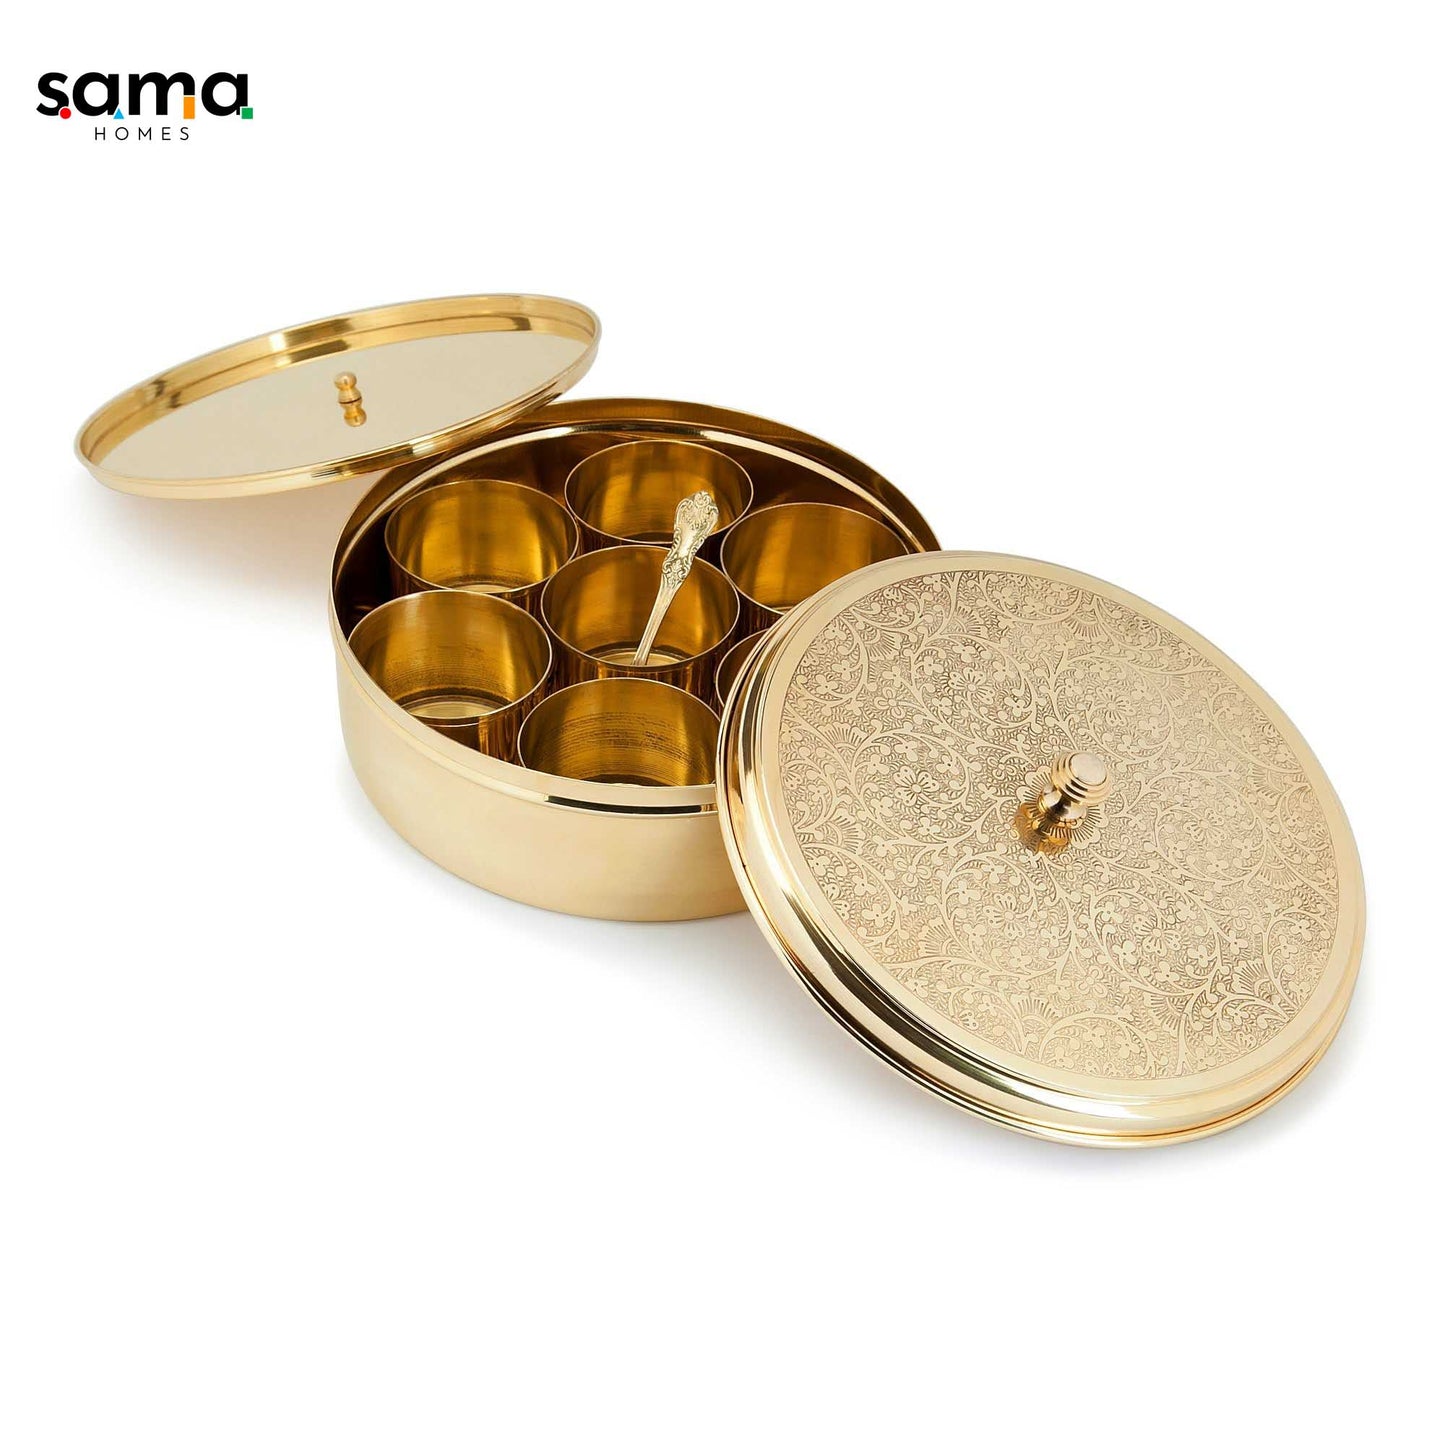 SAMA Homes - brass etched spice box 9 inches